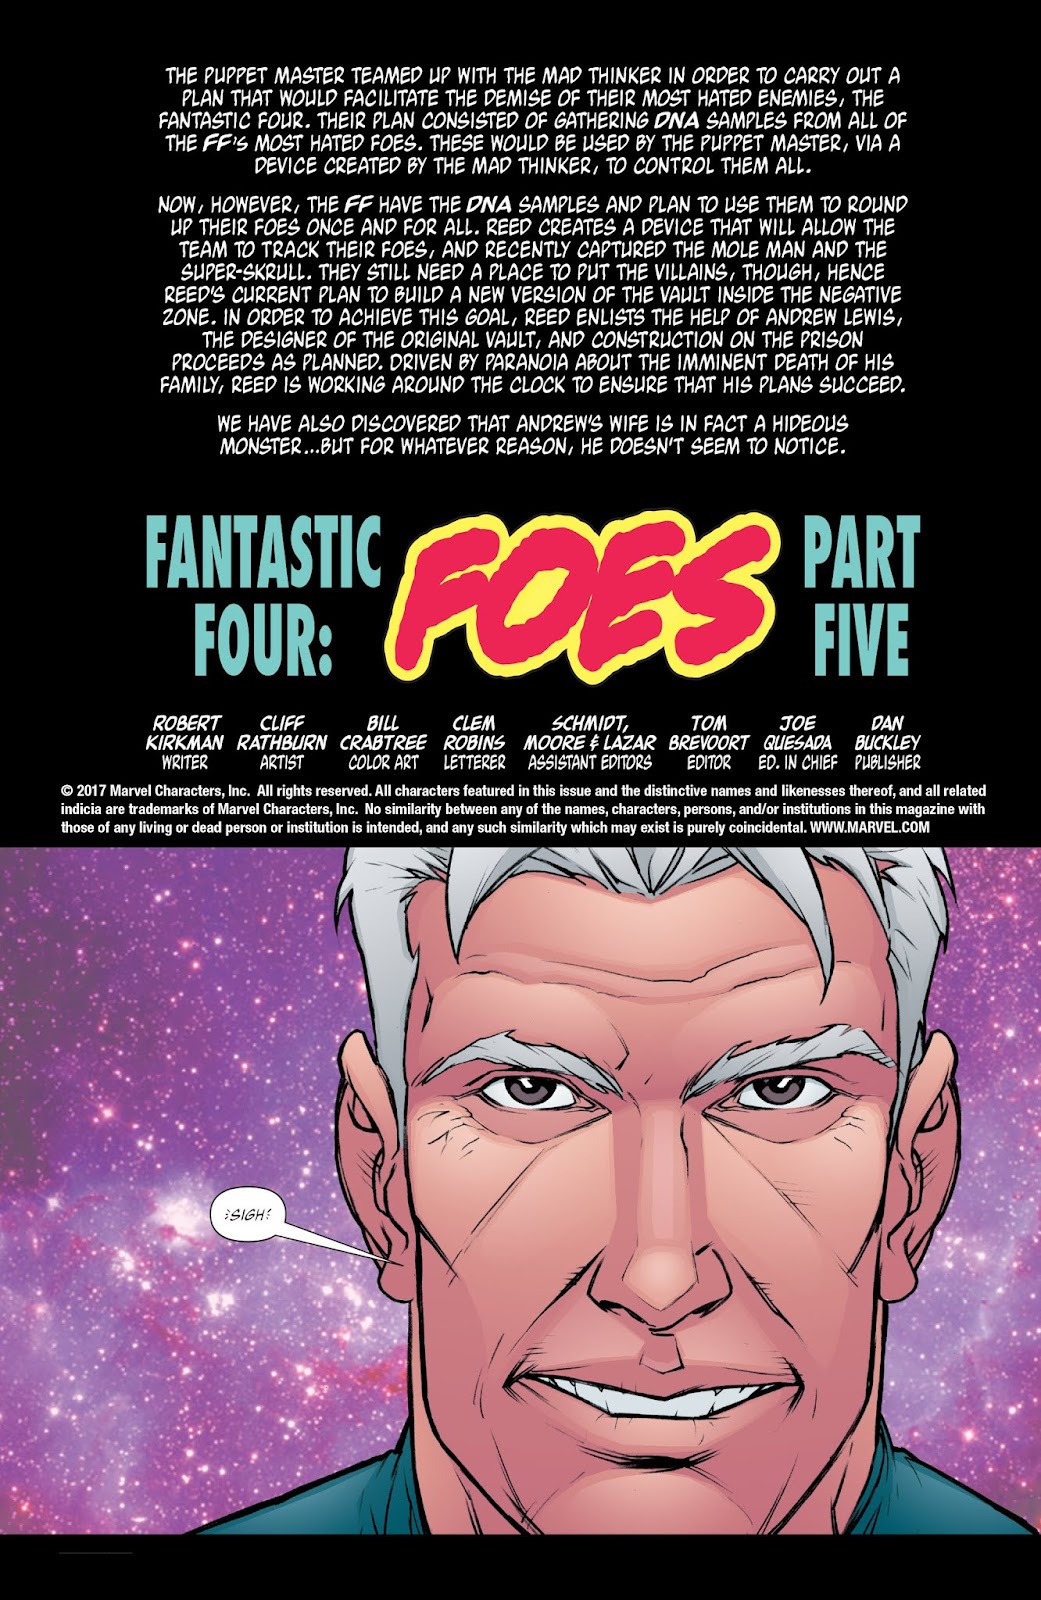 Fantastic Four: Foes issue 5 - Page 2